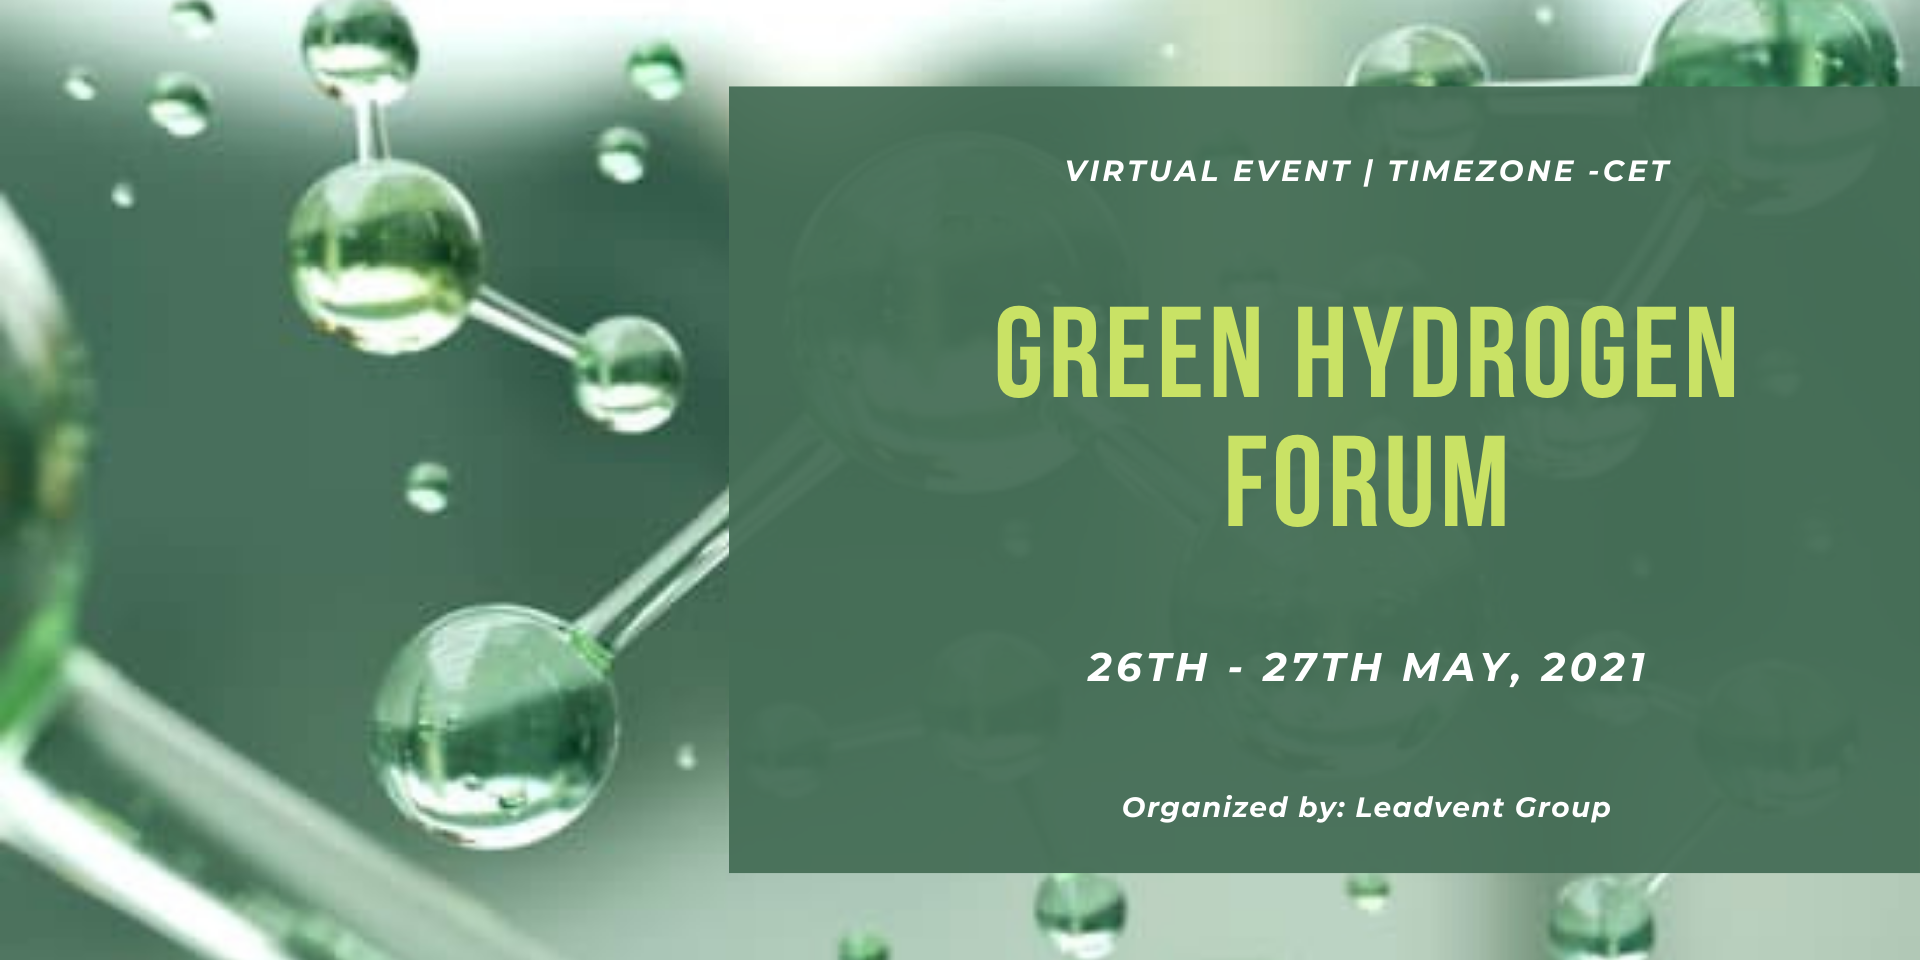 Green Hydrogen Forum organized by Leadvent Group